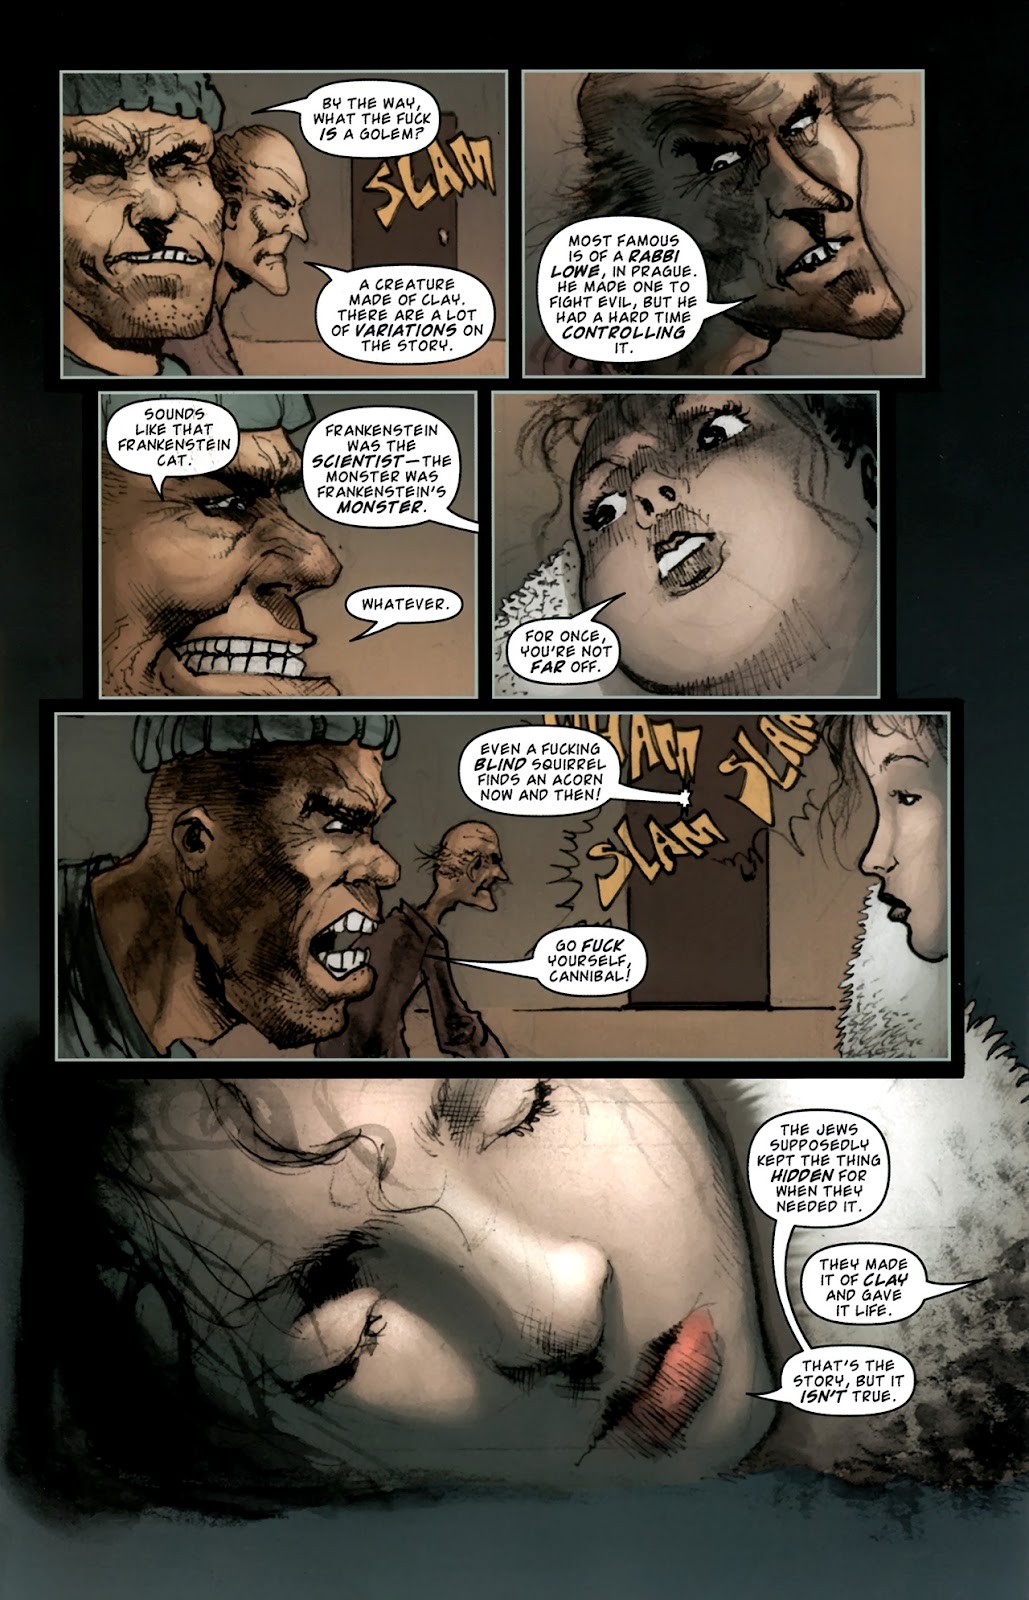 30 Days of Night: Night, Again issue 3 - Page 10